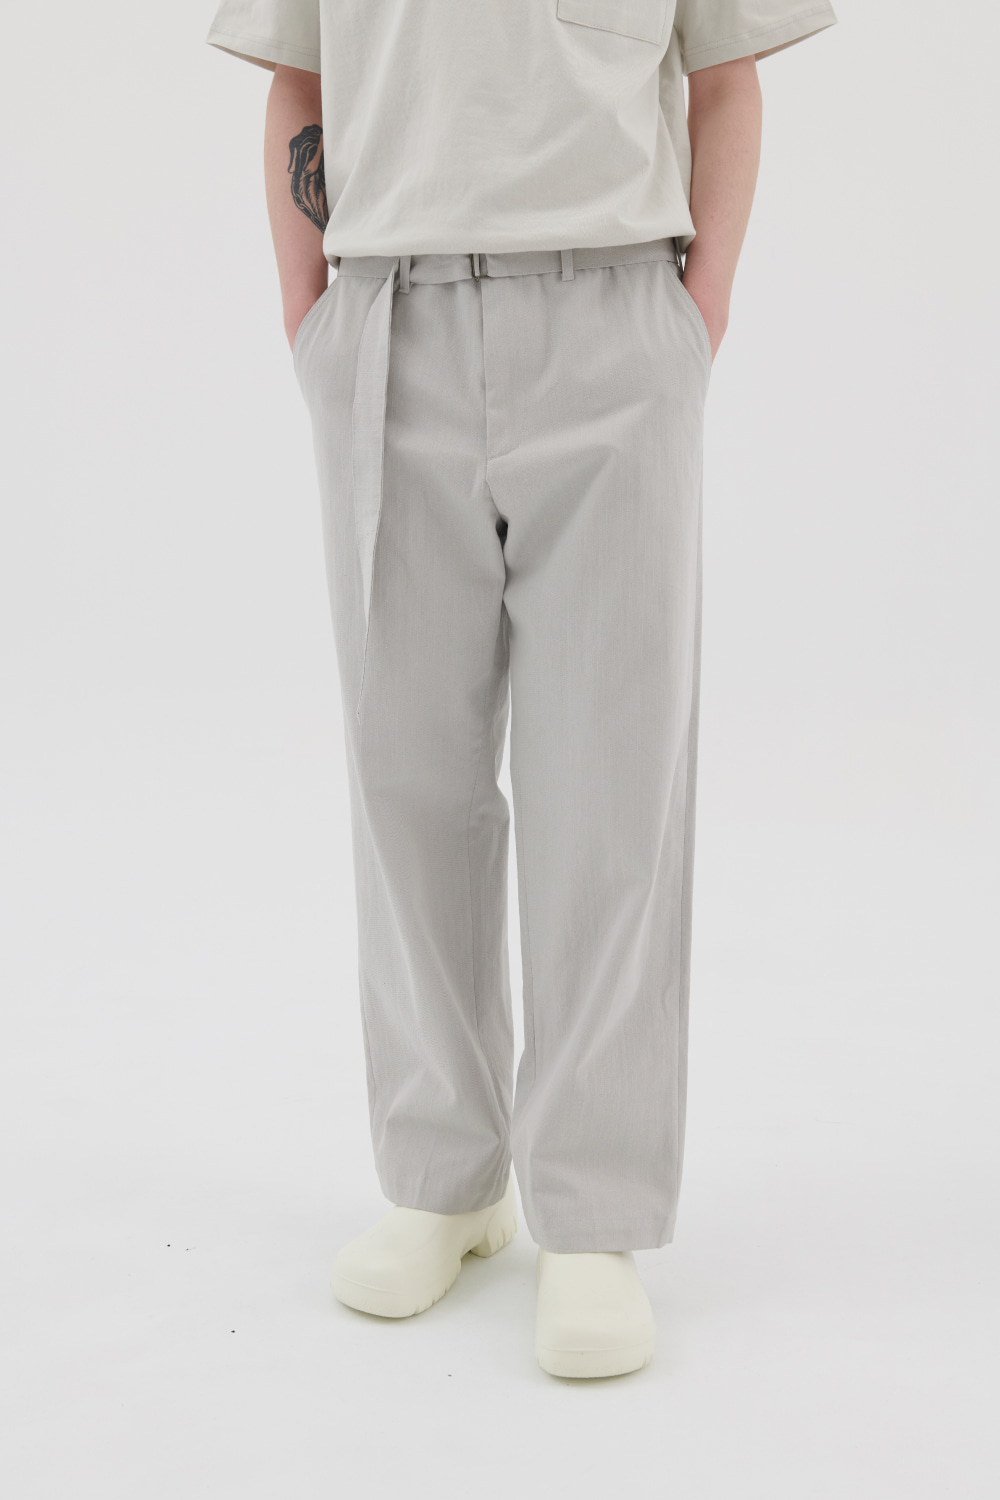 Belted Textured Cotton Pants (Light Gray)